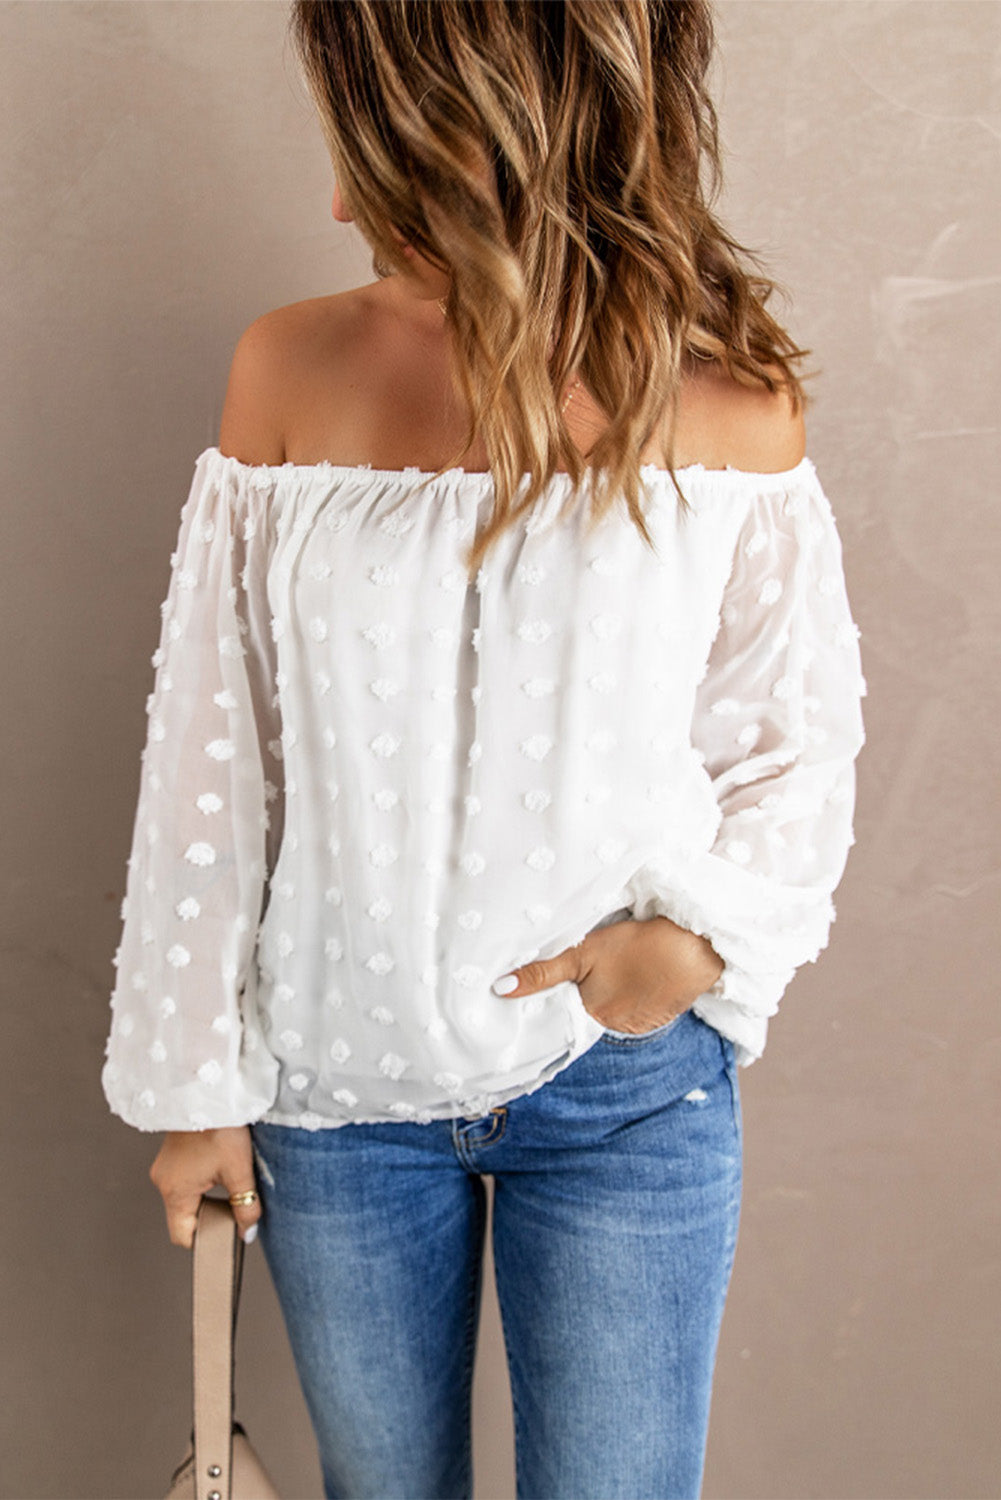 Blouse Blanche Epaules Denudees A Pois Suisses Manches Longues